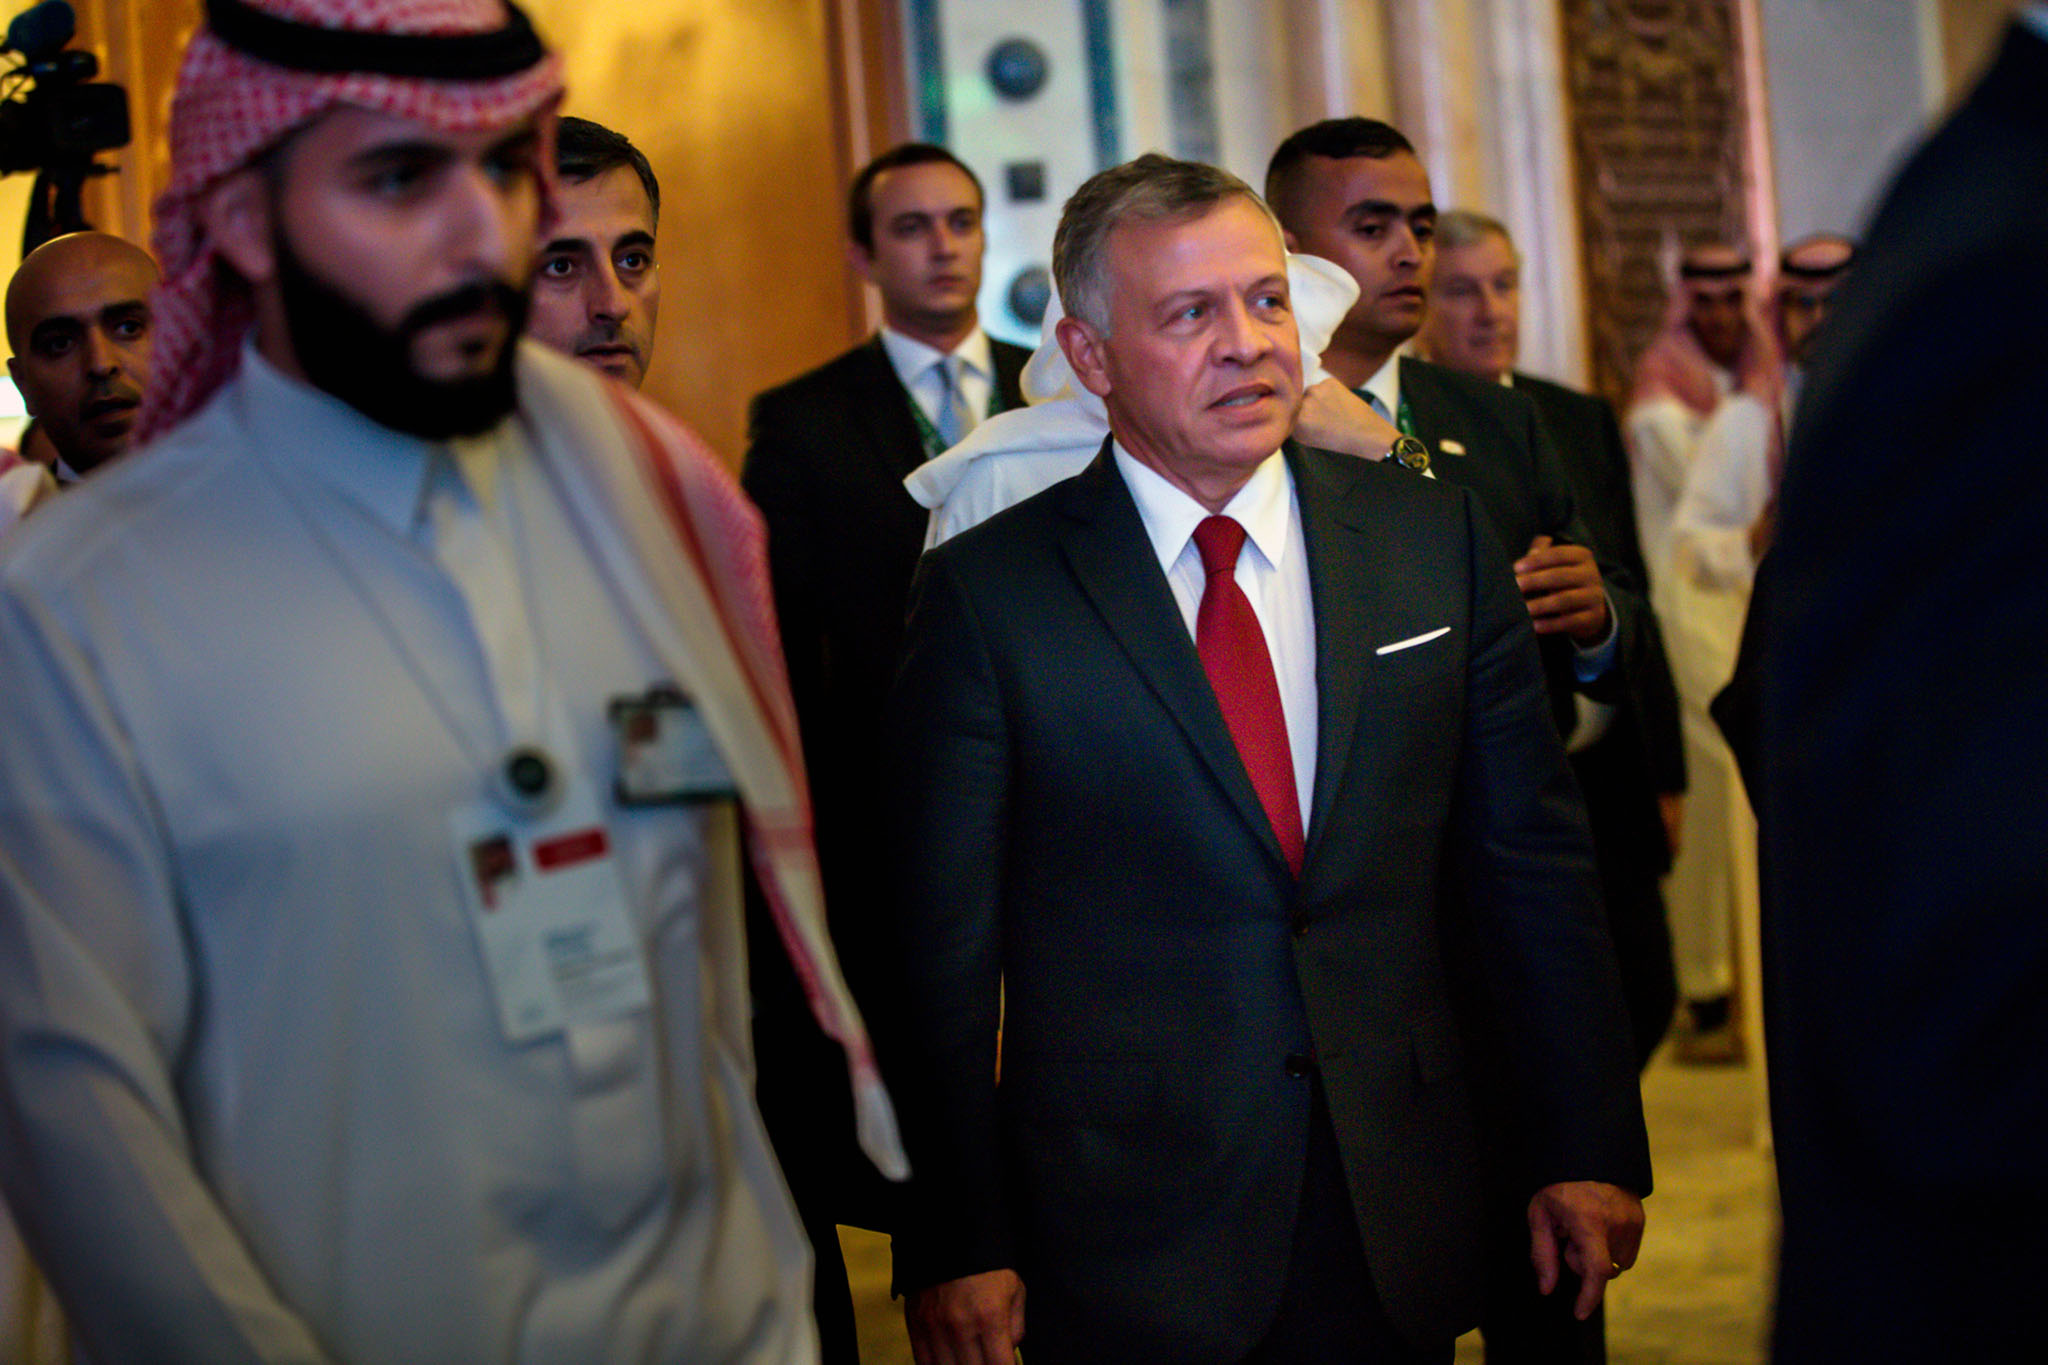 King Abdullah of Jordan, center, attends the opening of the Future Investment Initiative conference in Riyadh, Saudi Arabia, on Tuesday, Oct. 23, 2018. (Tasneem Alsultan/The New York Times)